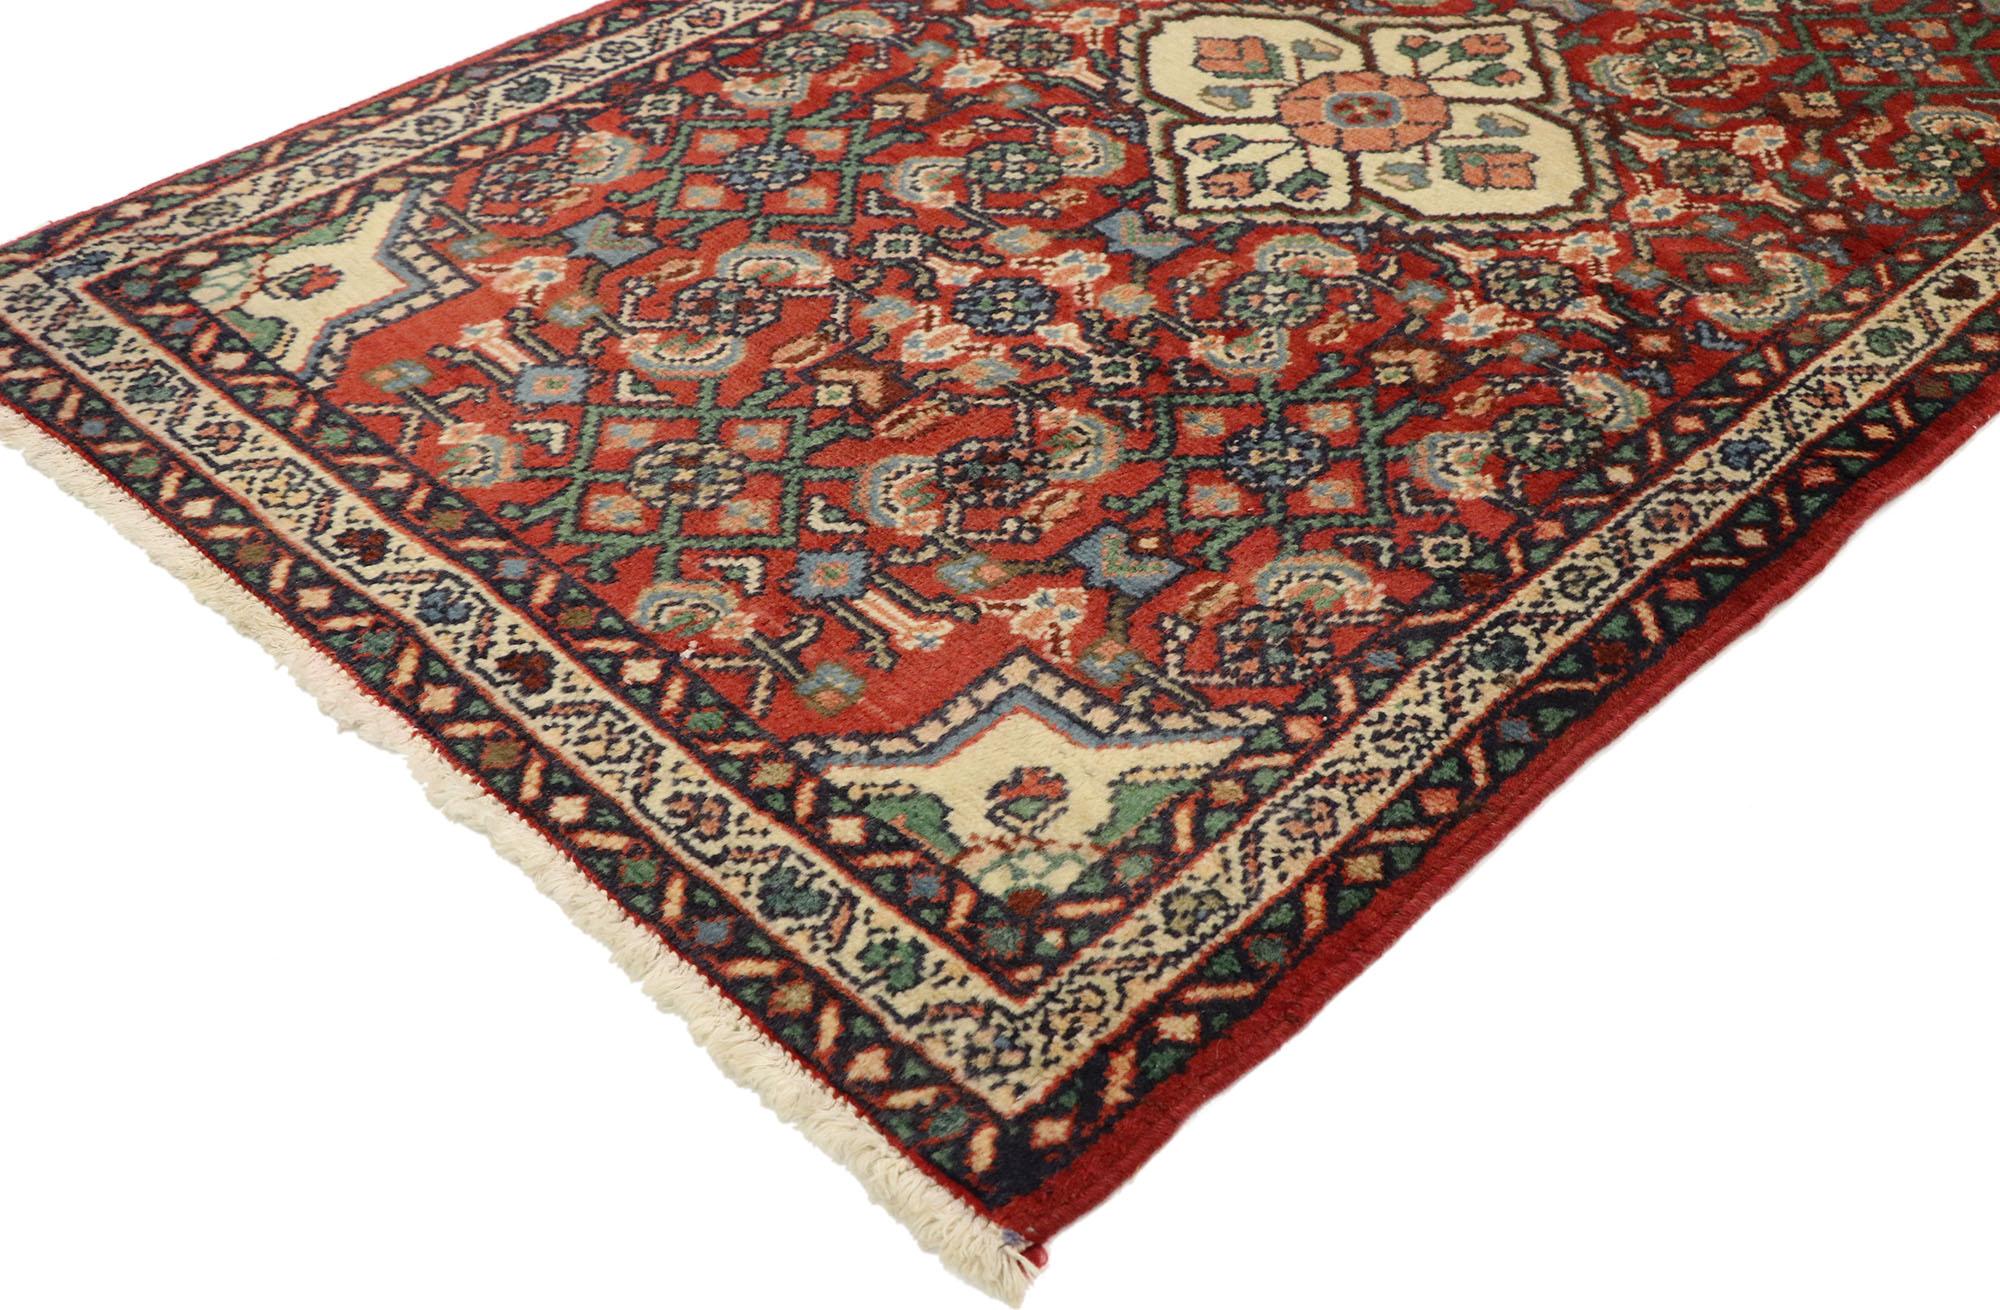 76076, vintage Persian Dergazine Hamadan rug with Herati pattern, foyer or entry rug. This hand knotted wool vintage Persian Hamadan accent rug features a centre medallion with an all-over Herati pattern. It is surrounded by a complementary triple